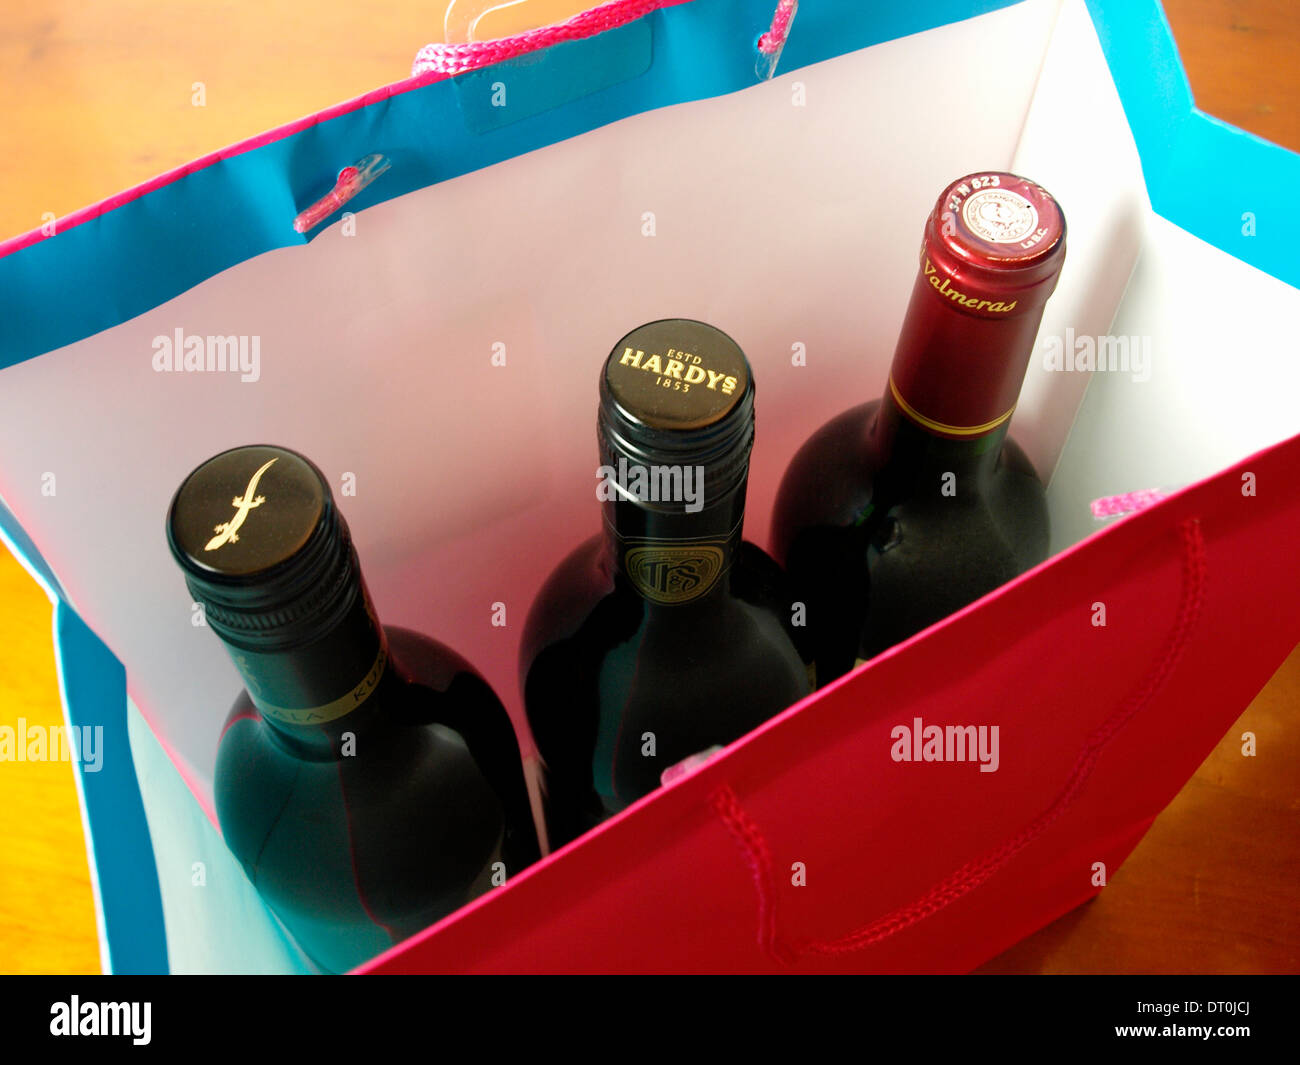 Three wine bottles in a gift bag, Stock Photo